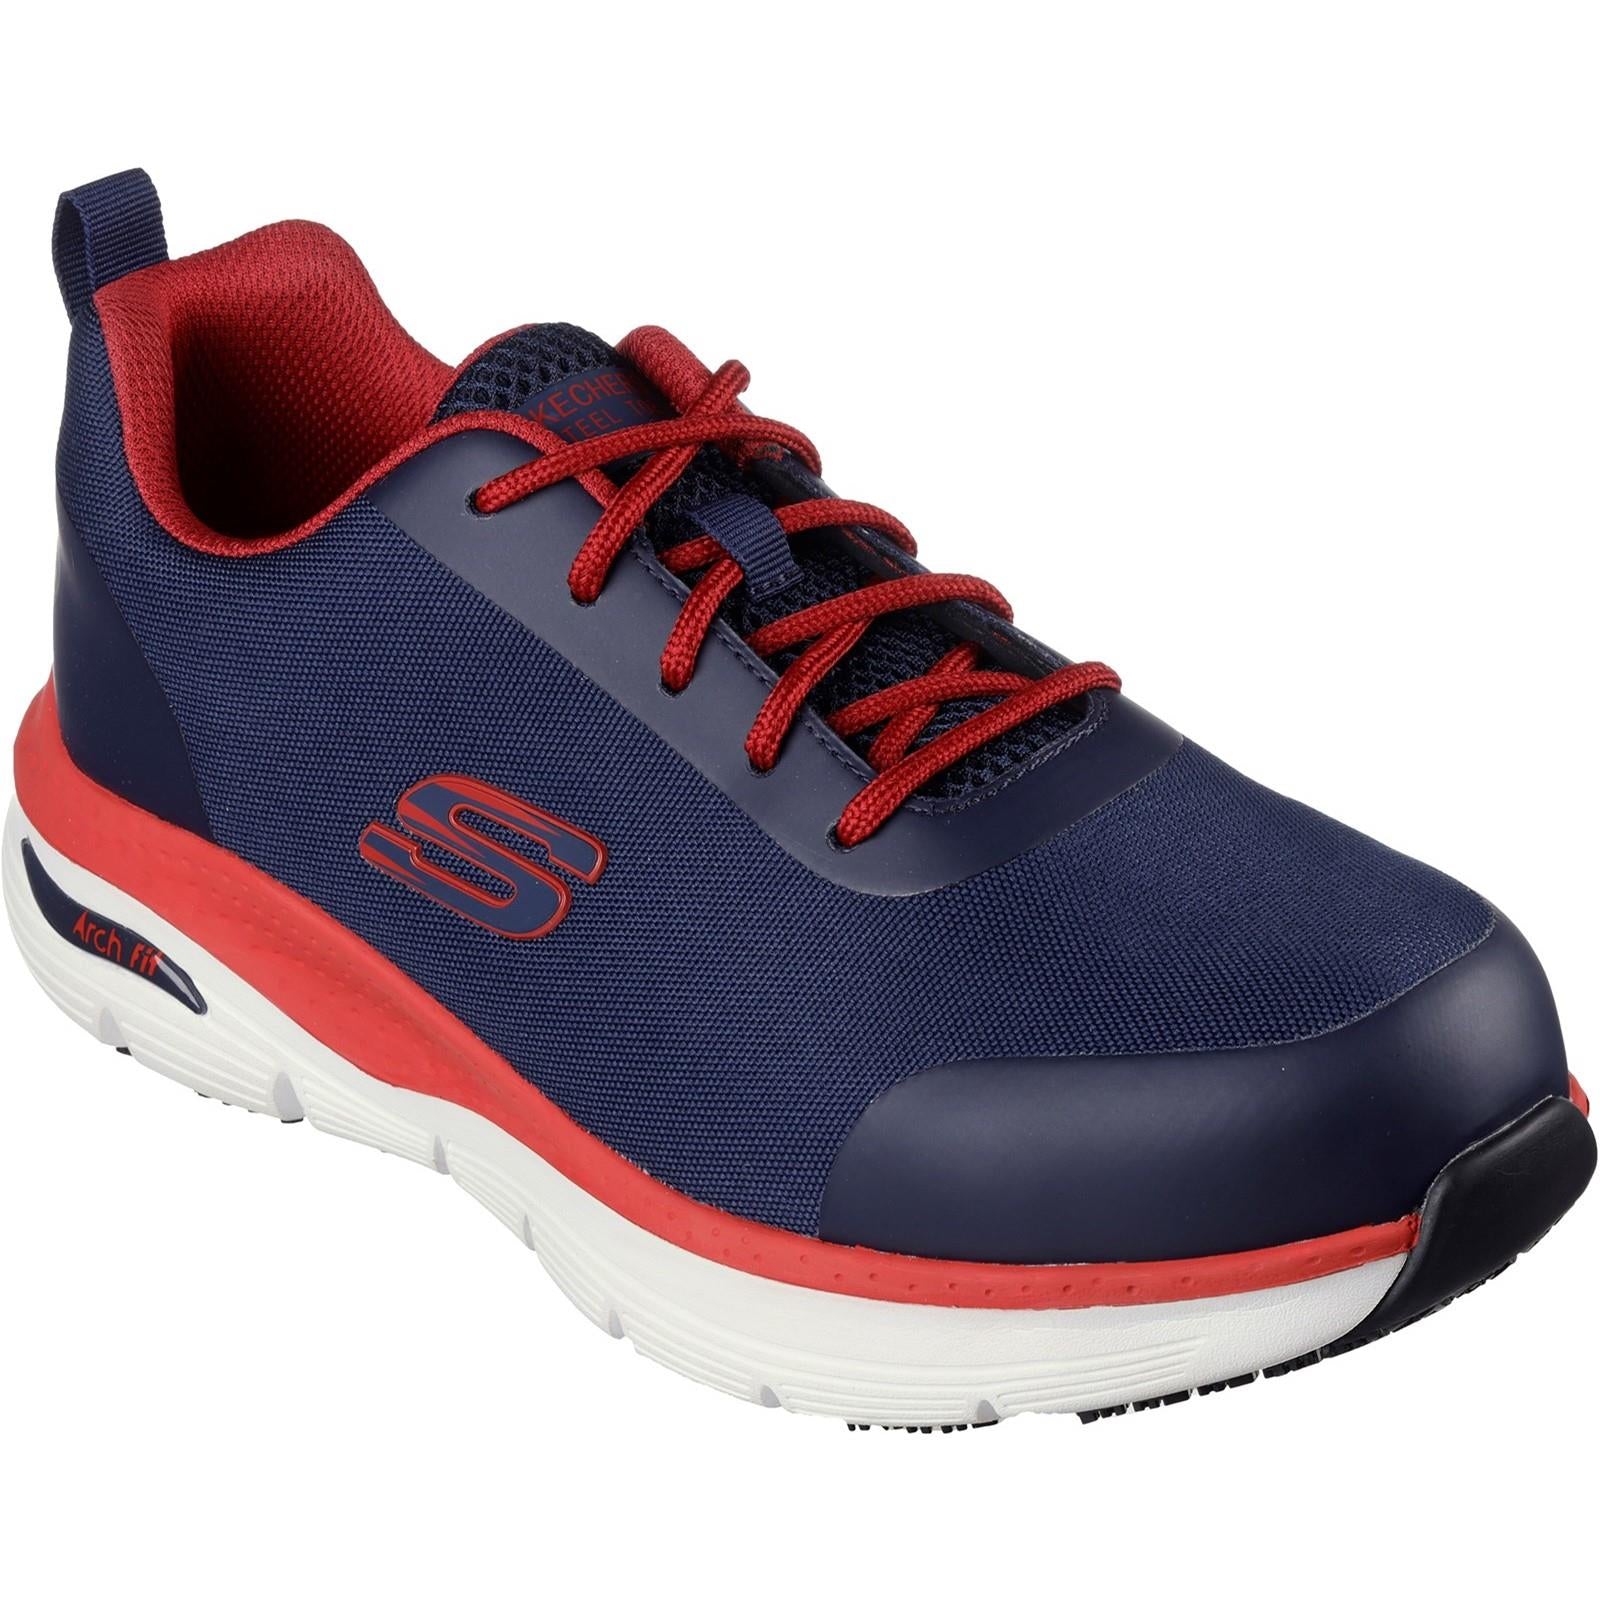 Skechers Arch Fit Ringstap S3 navy/red steel toe work safety trainers #200086EC